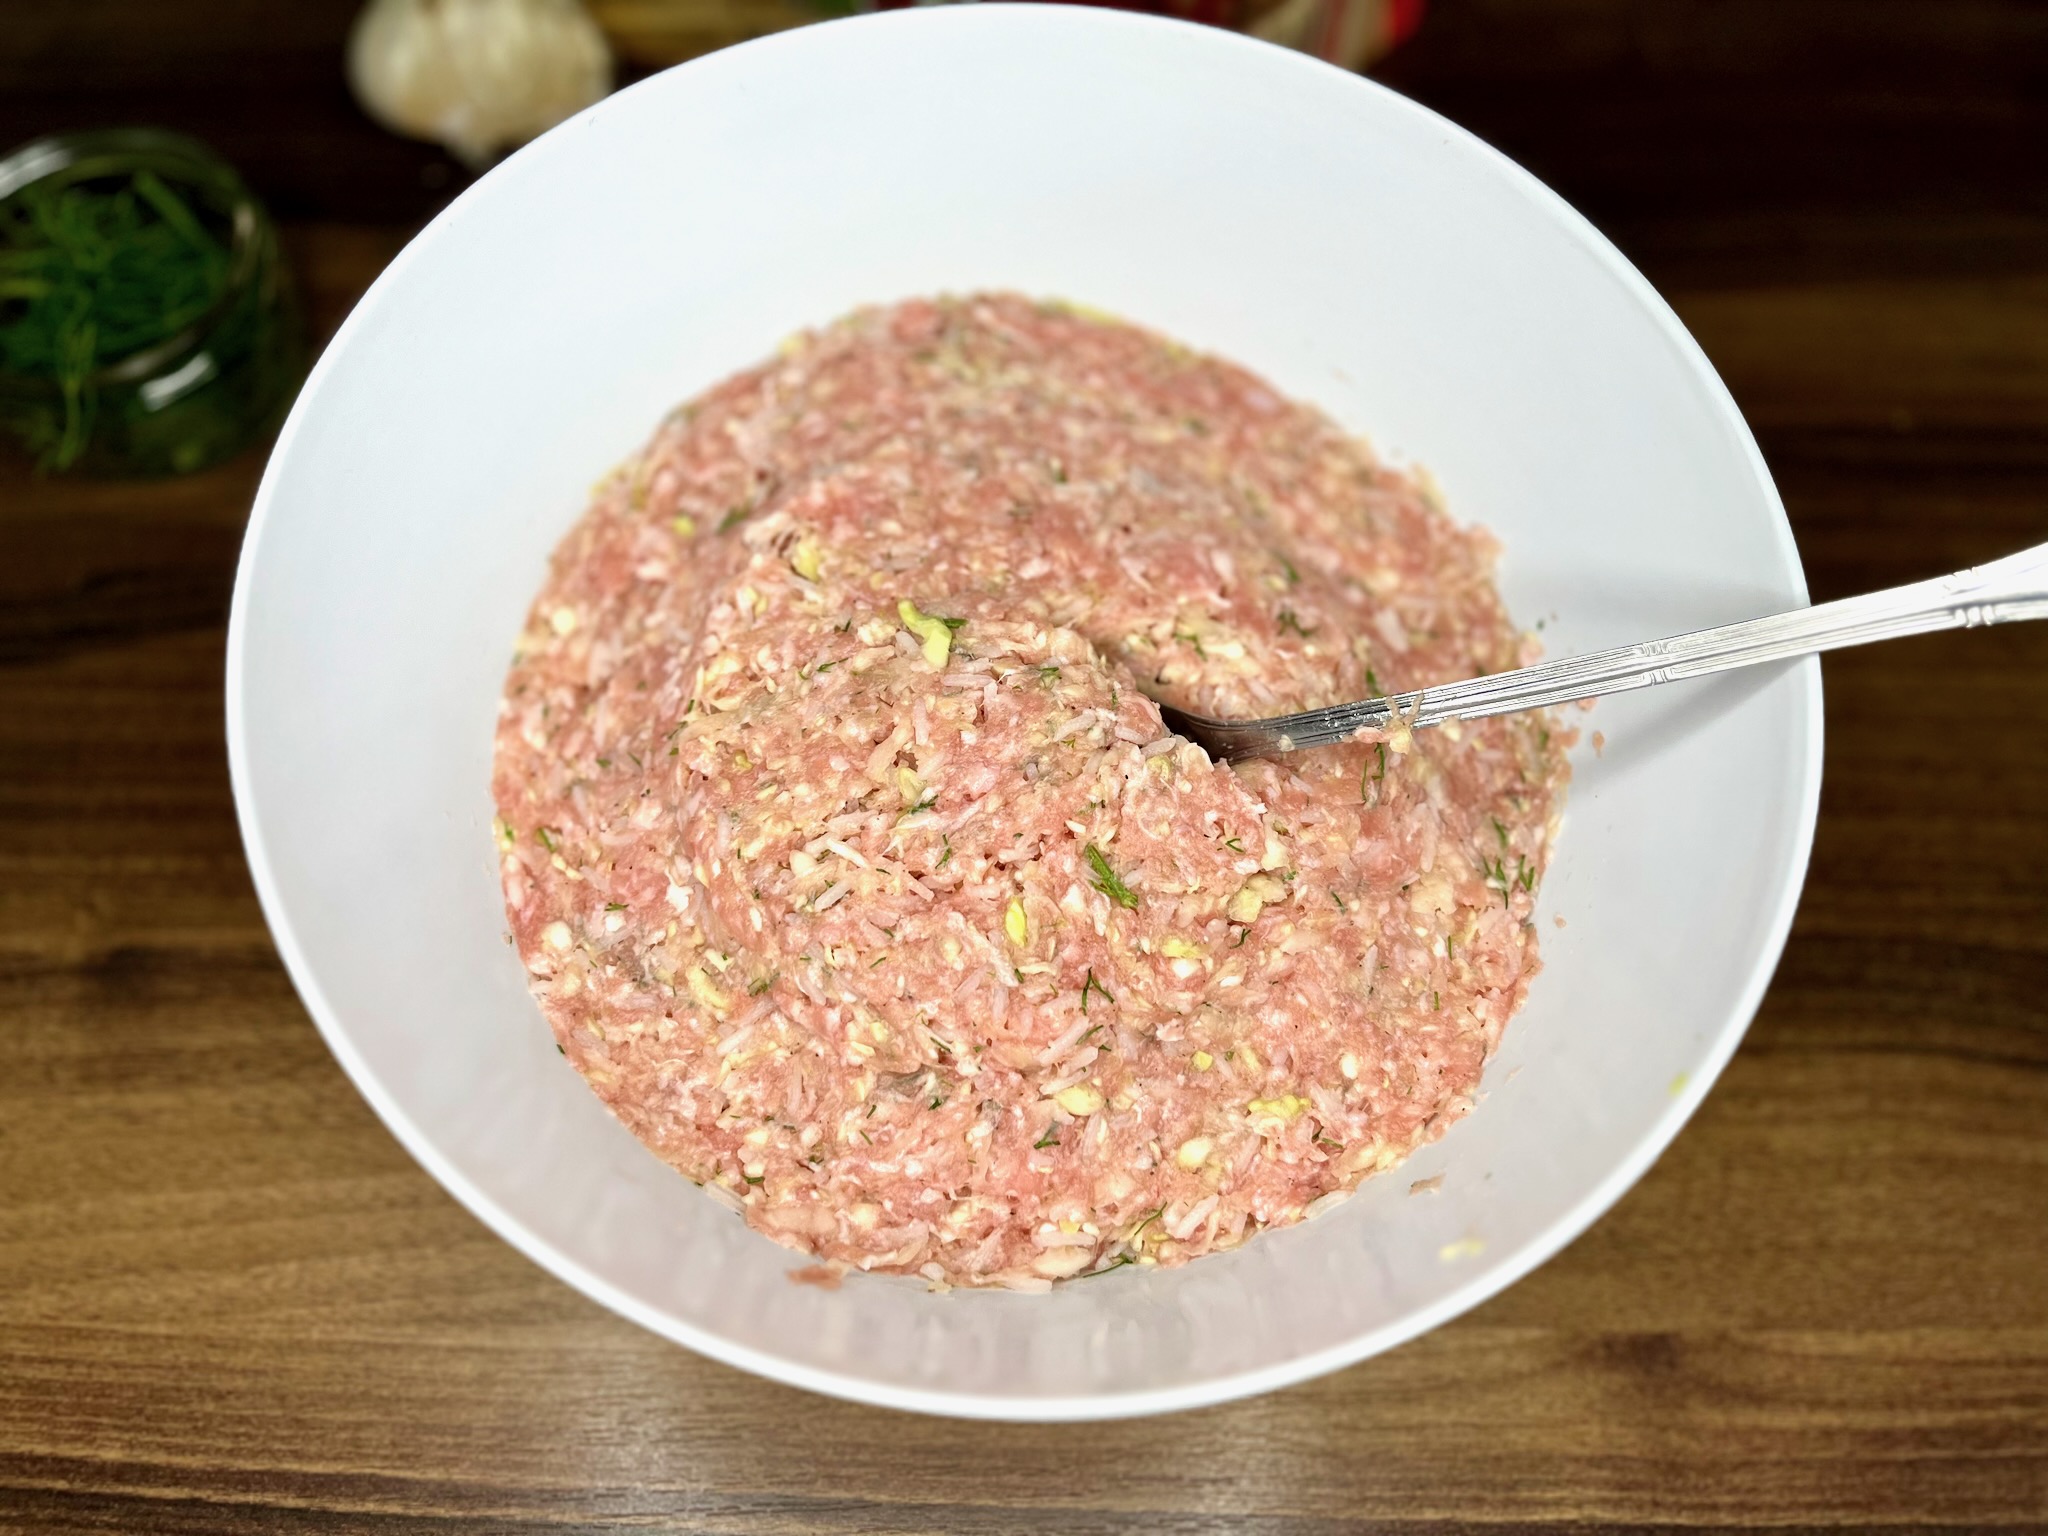 Gently mixed grated cabbage with minced meat in a large bowl